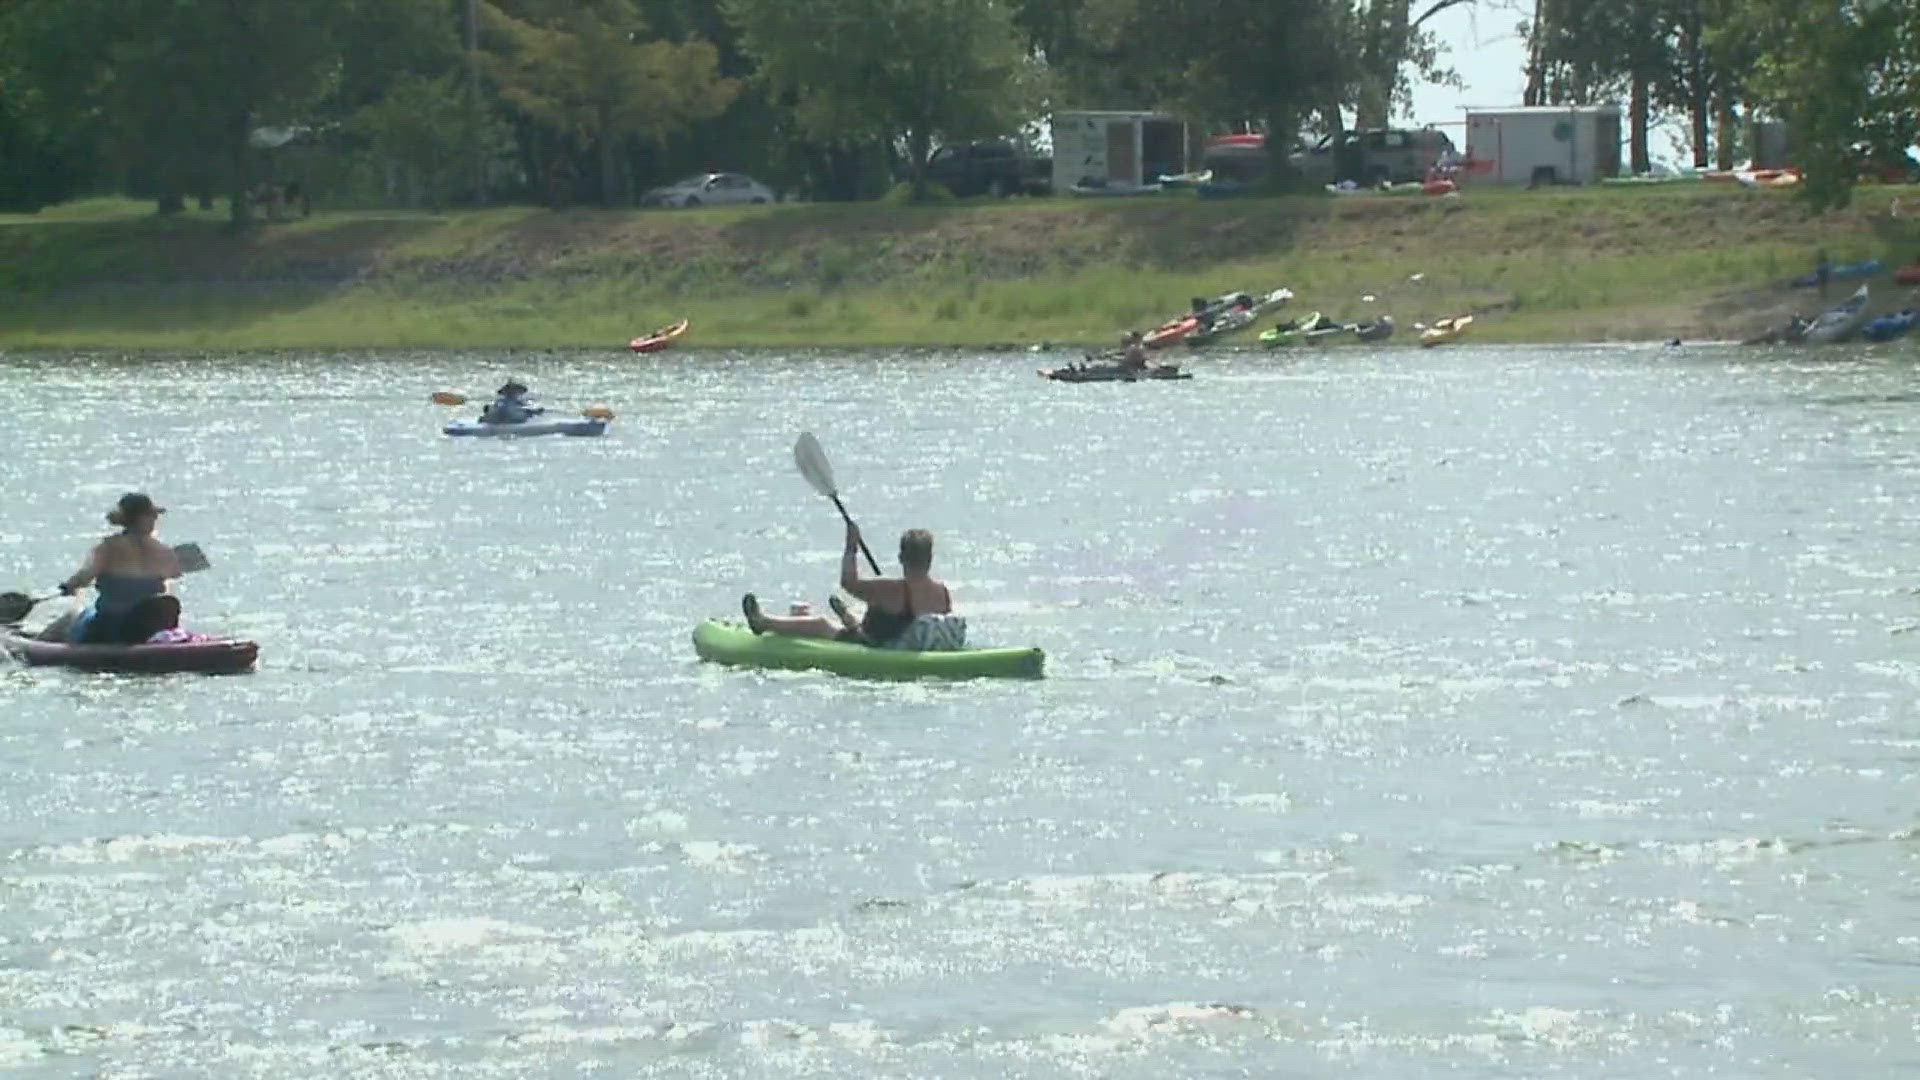 Organizers hope to break the world record for largest raft of canoes and kayaks, which currently stands at 3,151.